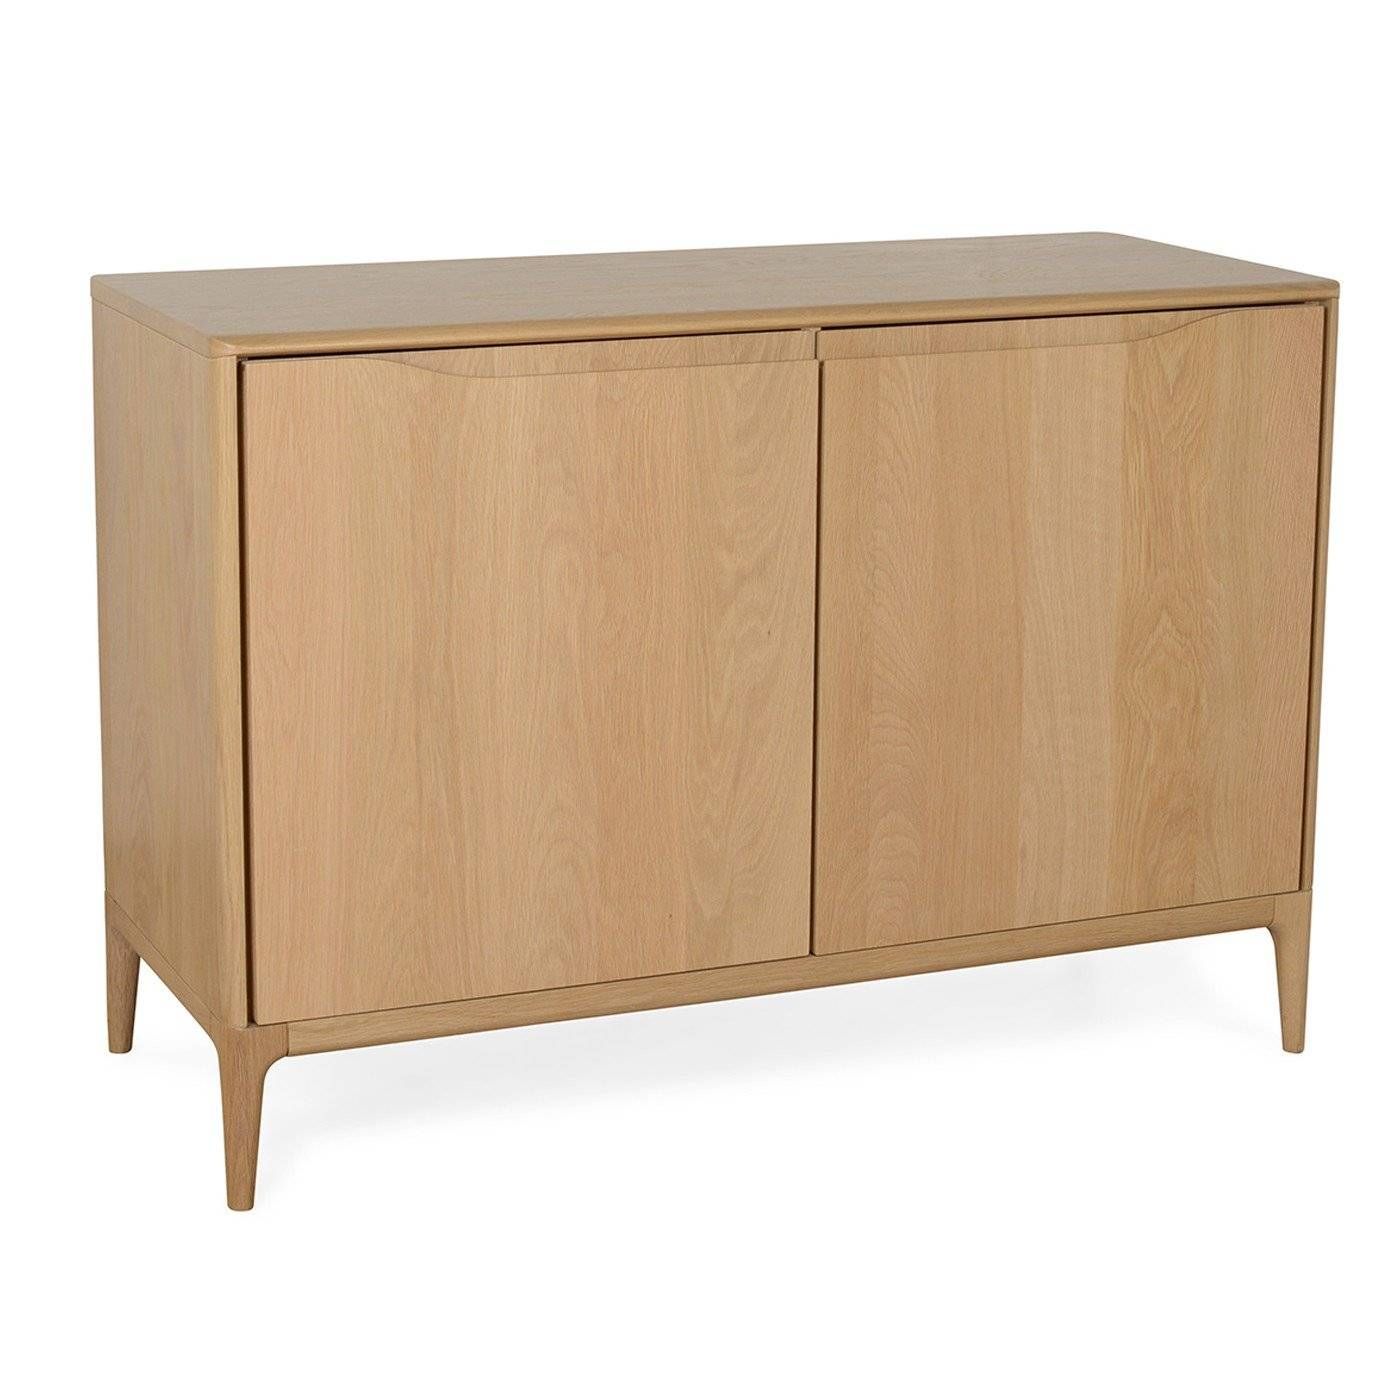 Designer Sideboards | Modern & Contemporary Sideboards | Heal's With Regard To Small Sideboard Cabinets (View 17 of 30)